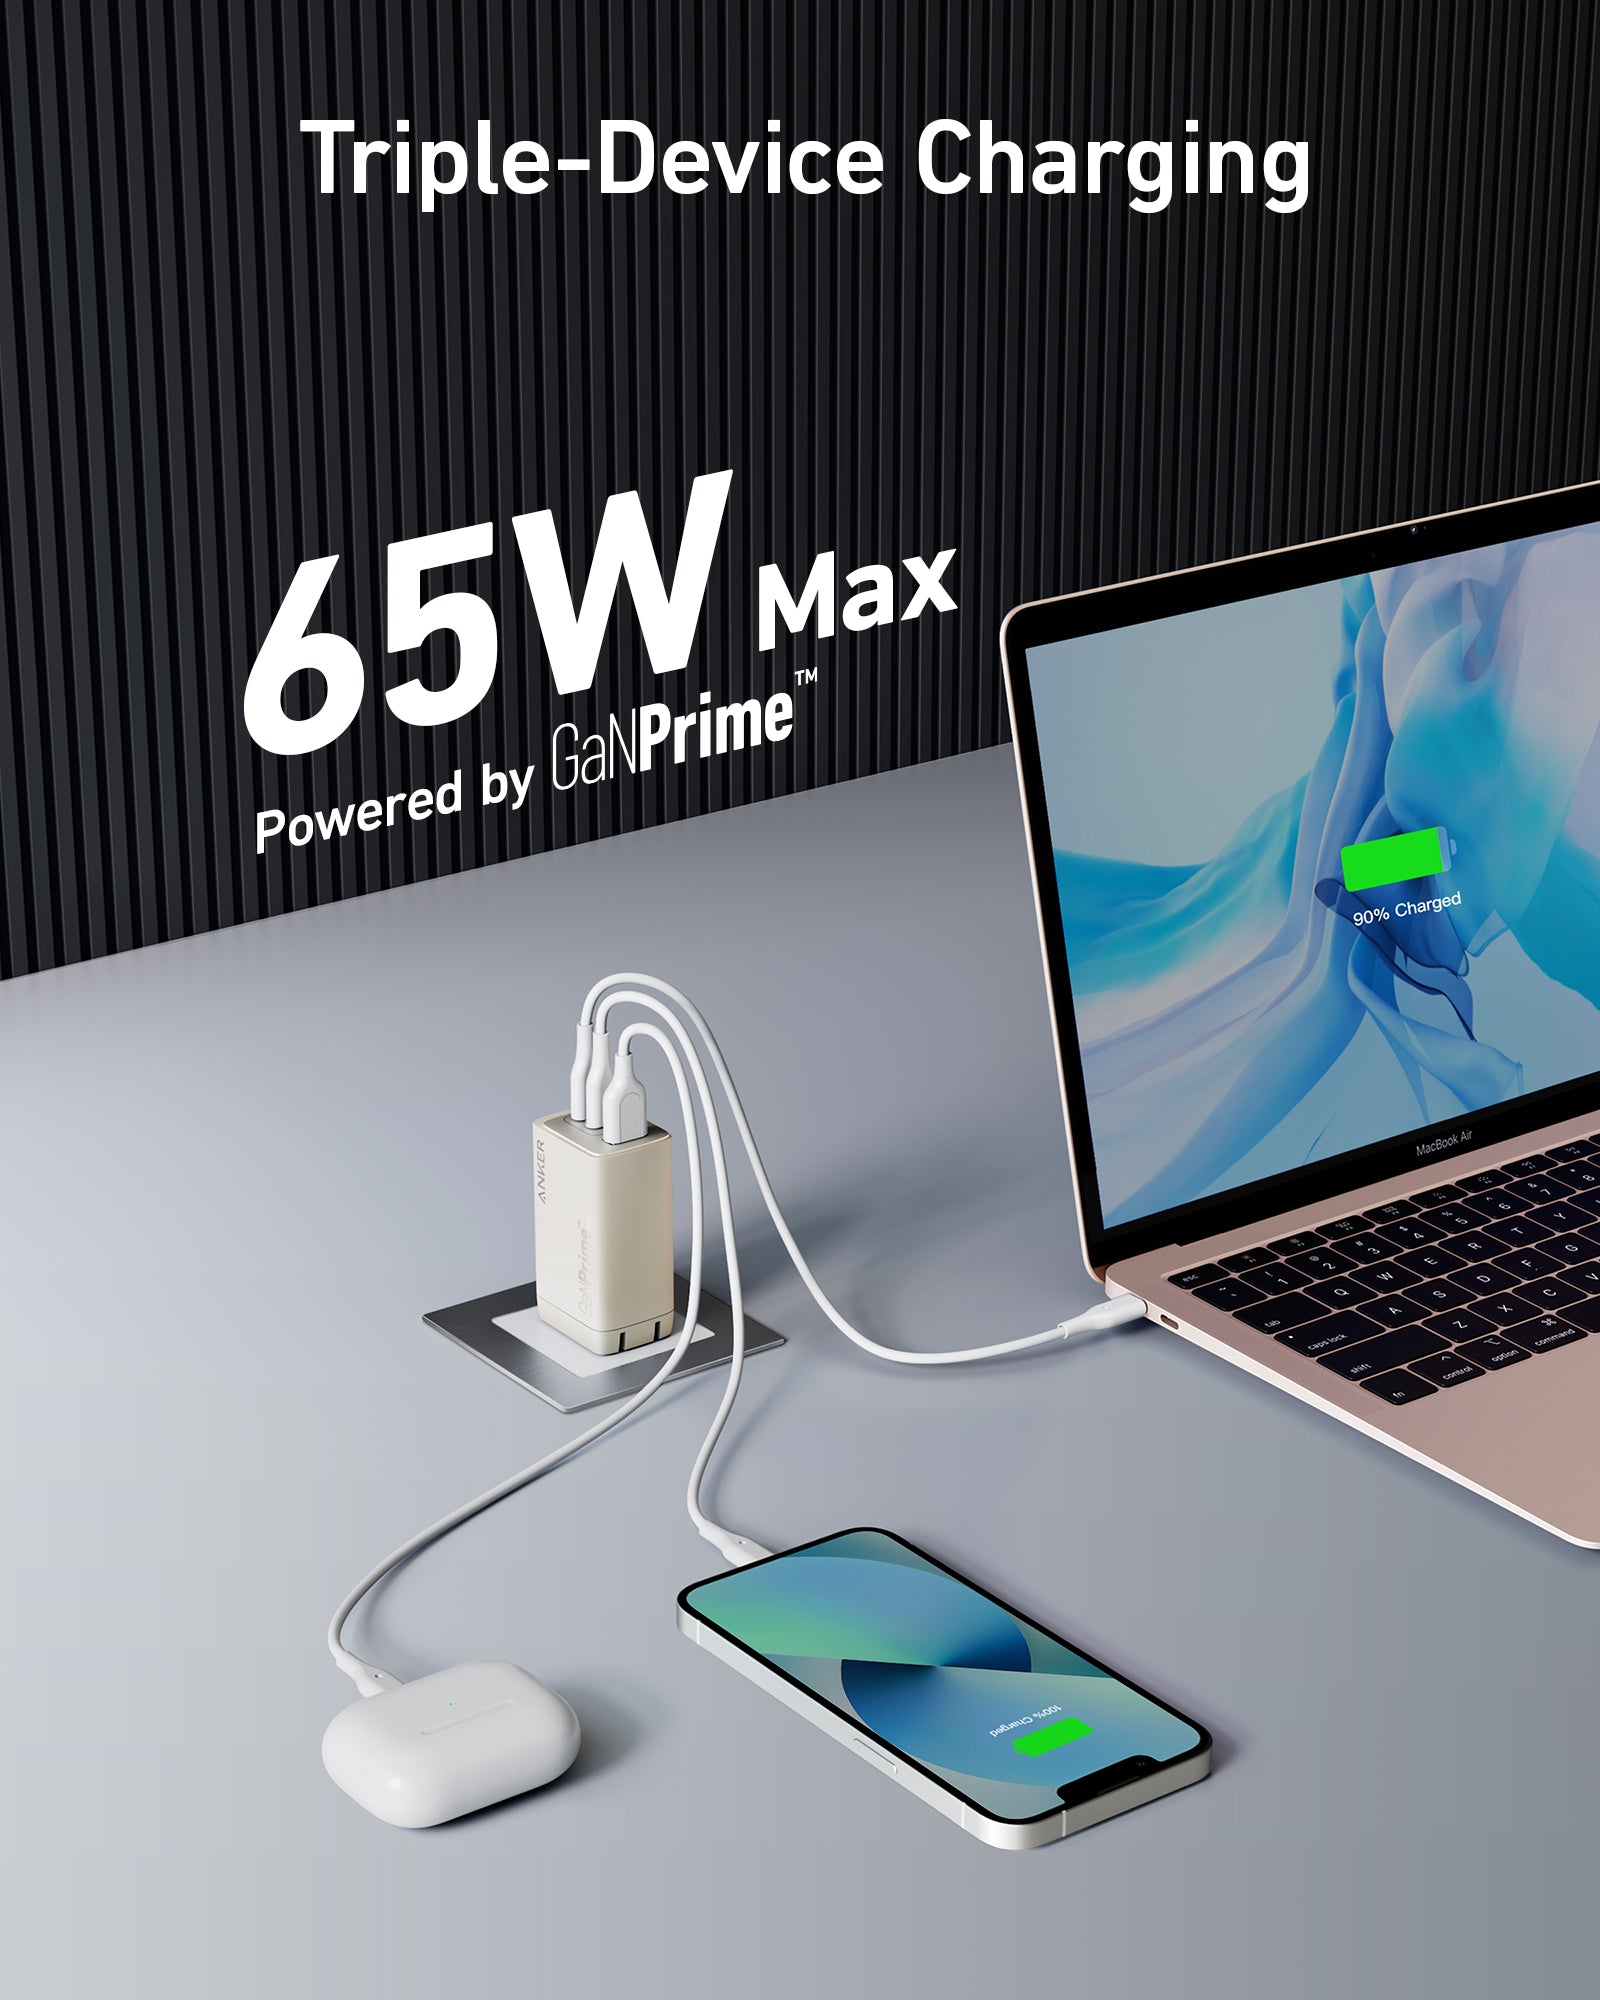 Anker's new GaNPrime charger lineup is cranking out up to 150 W of power